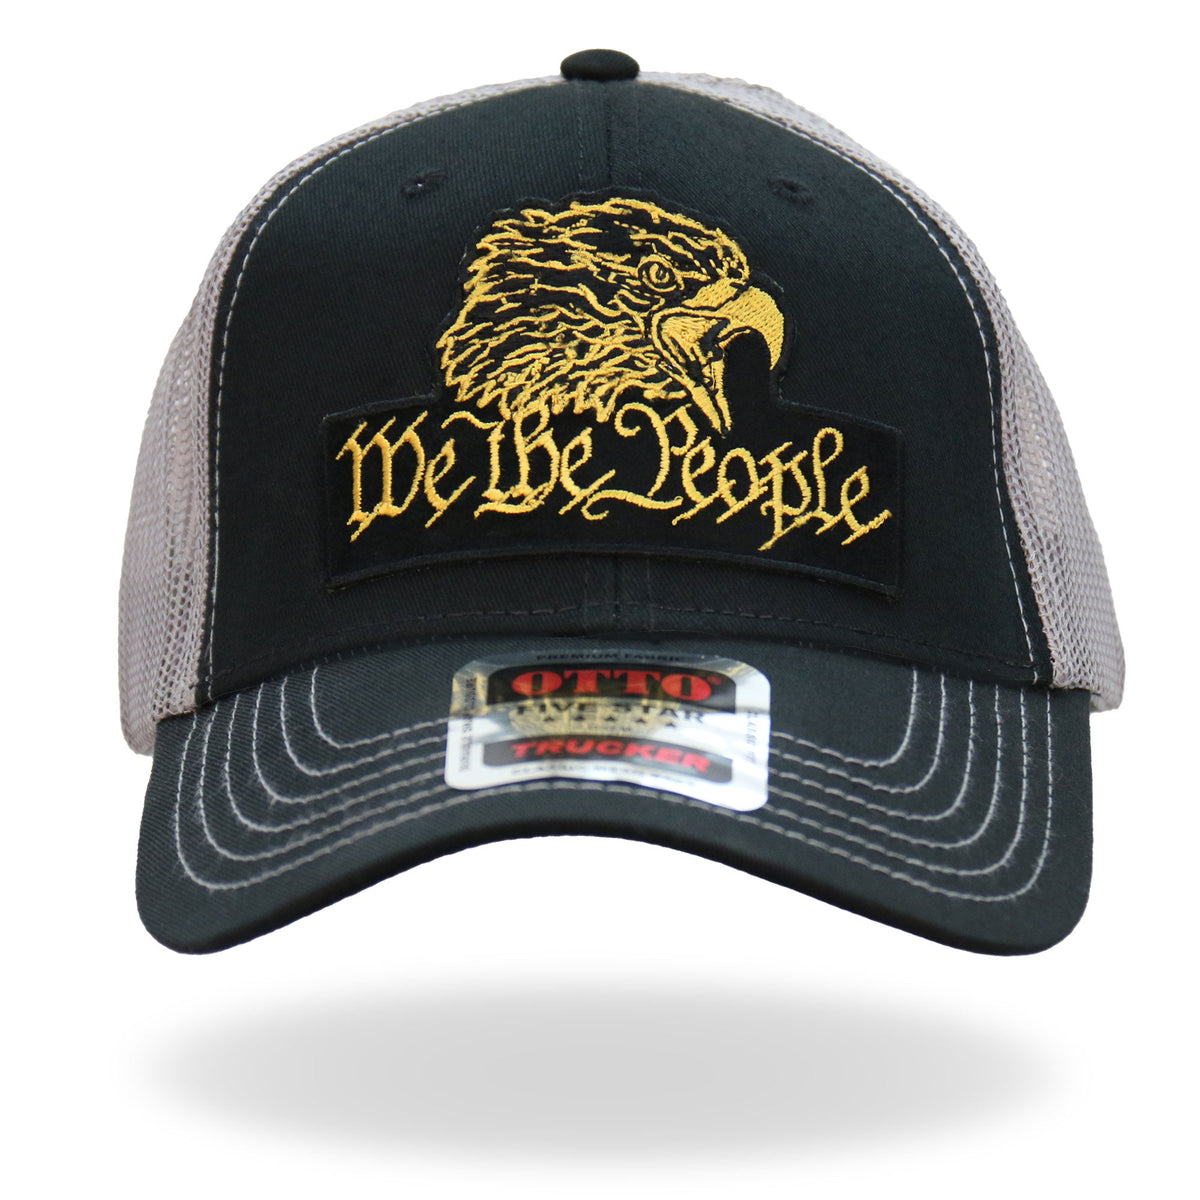 Hot Leathers Black Gray and Yellow Trucker Hat We The People Eagle GSH1049